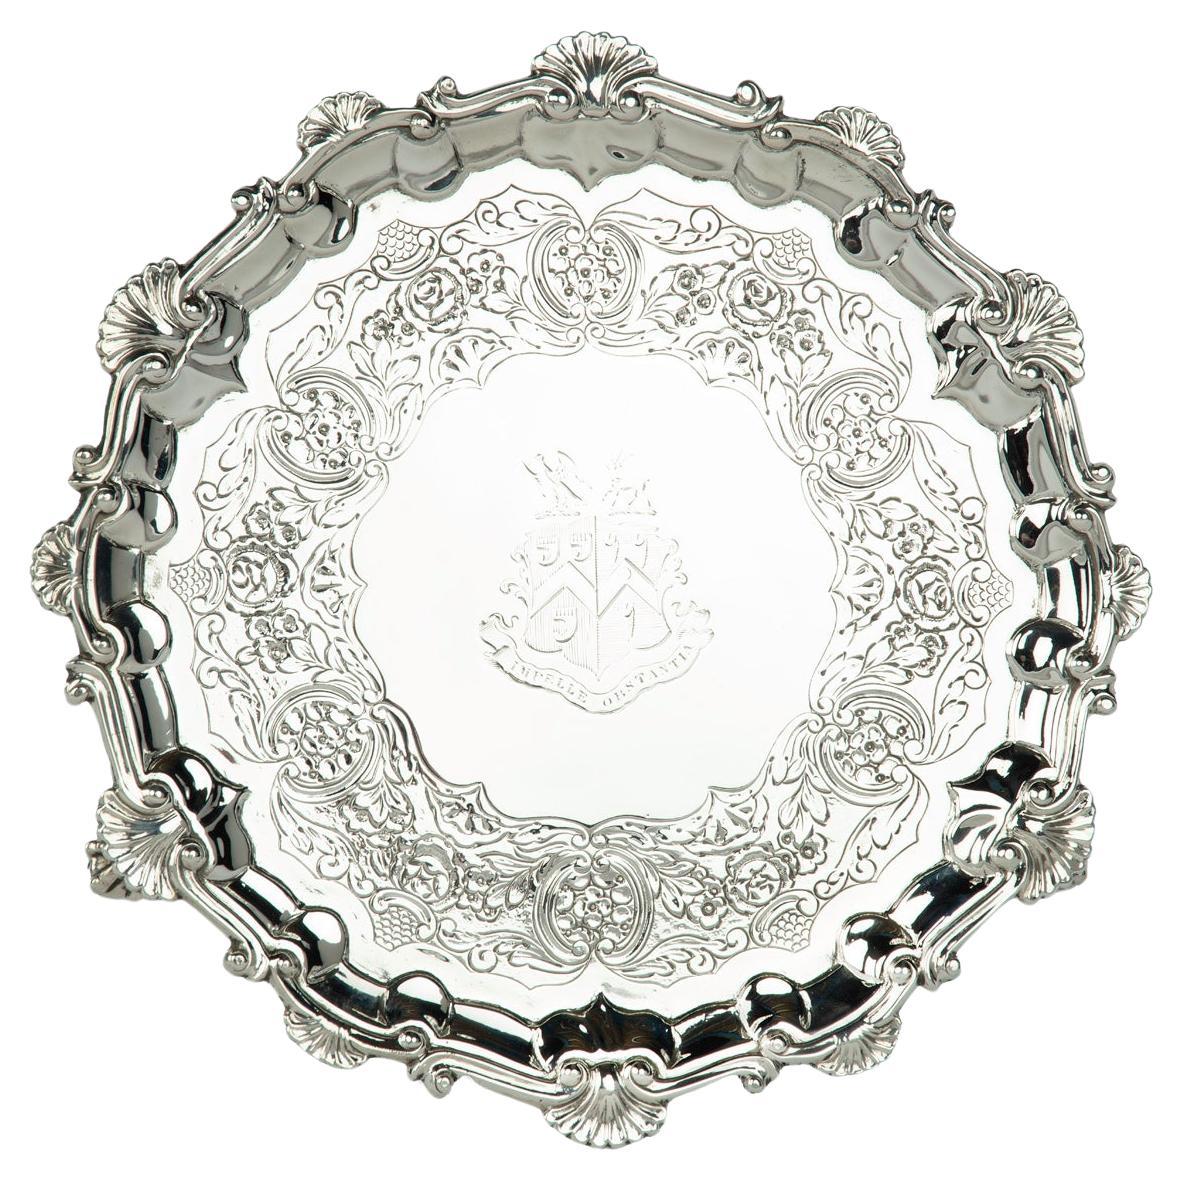 A George IV crested silver tray commemorating the marriage Colonel Thomas Arthur